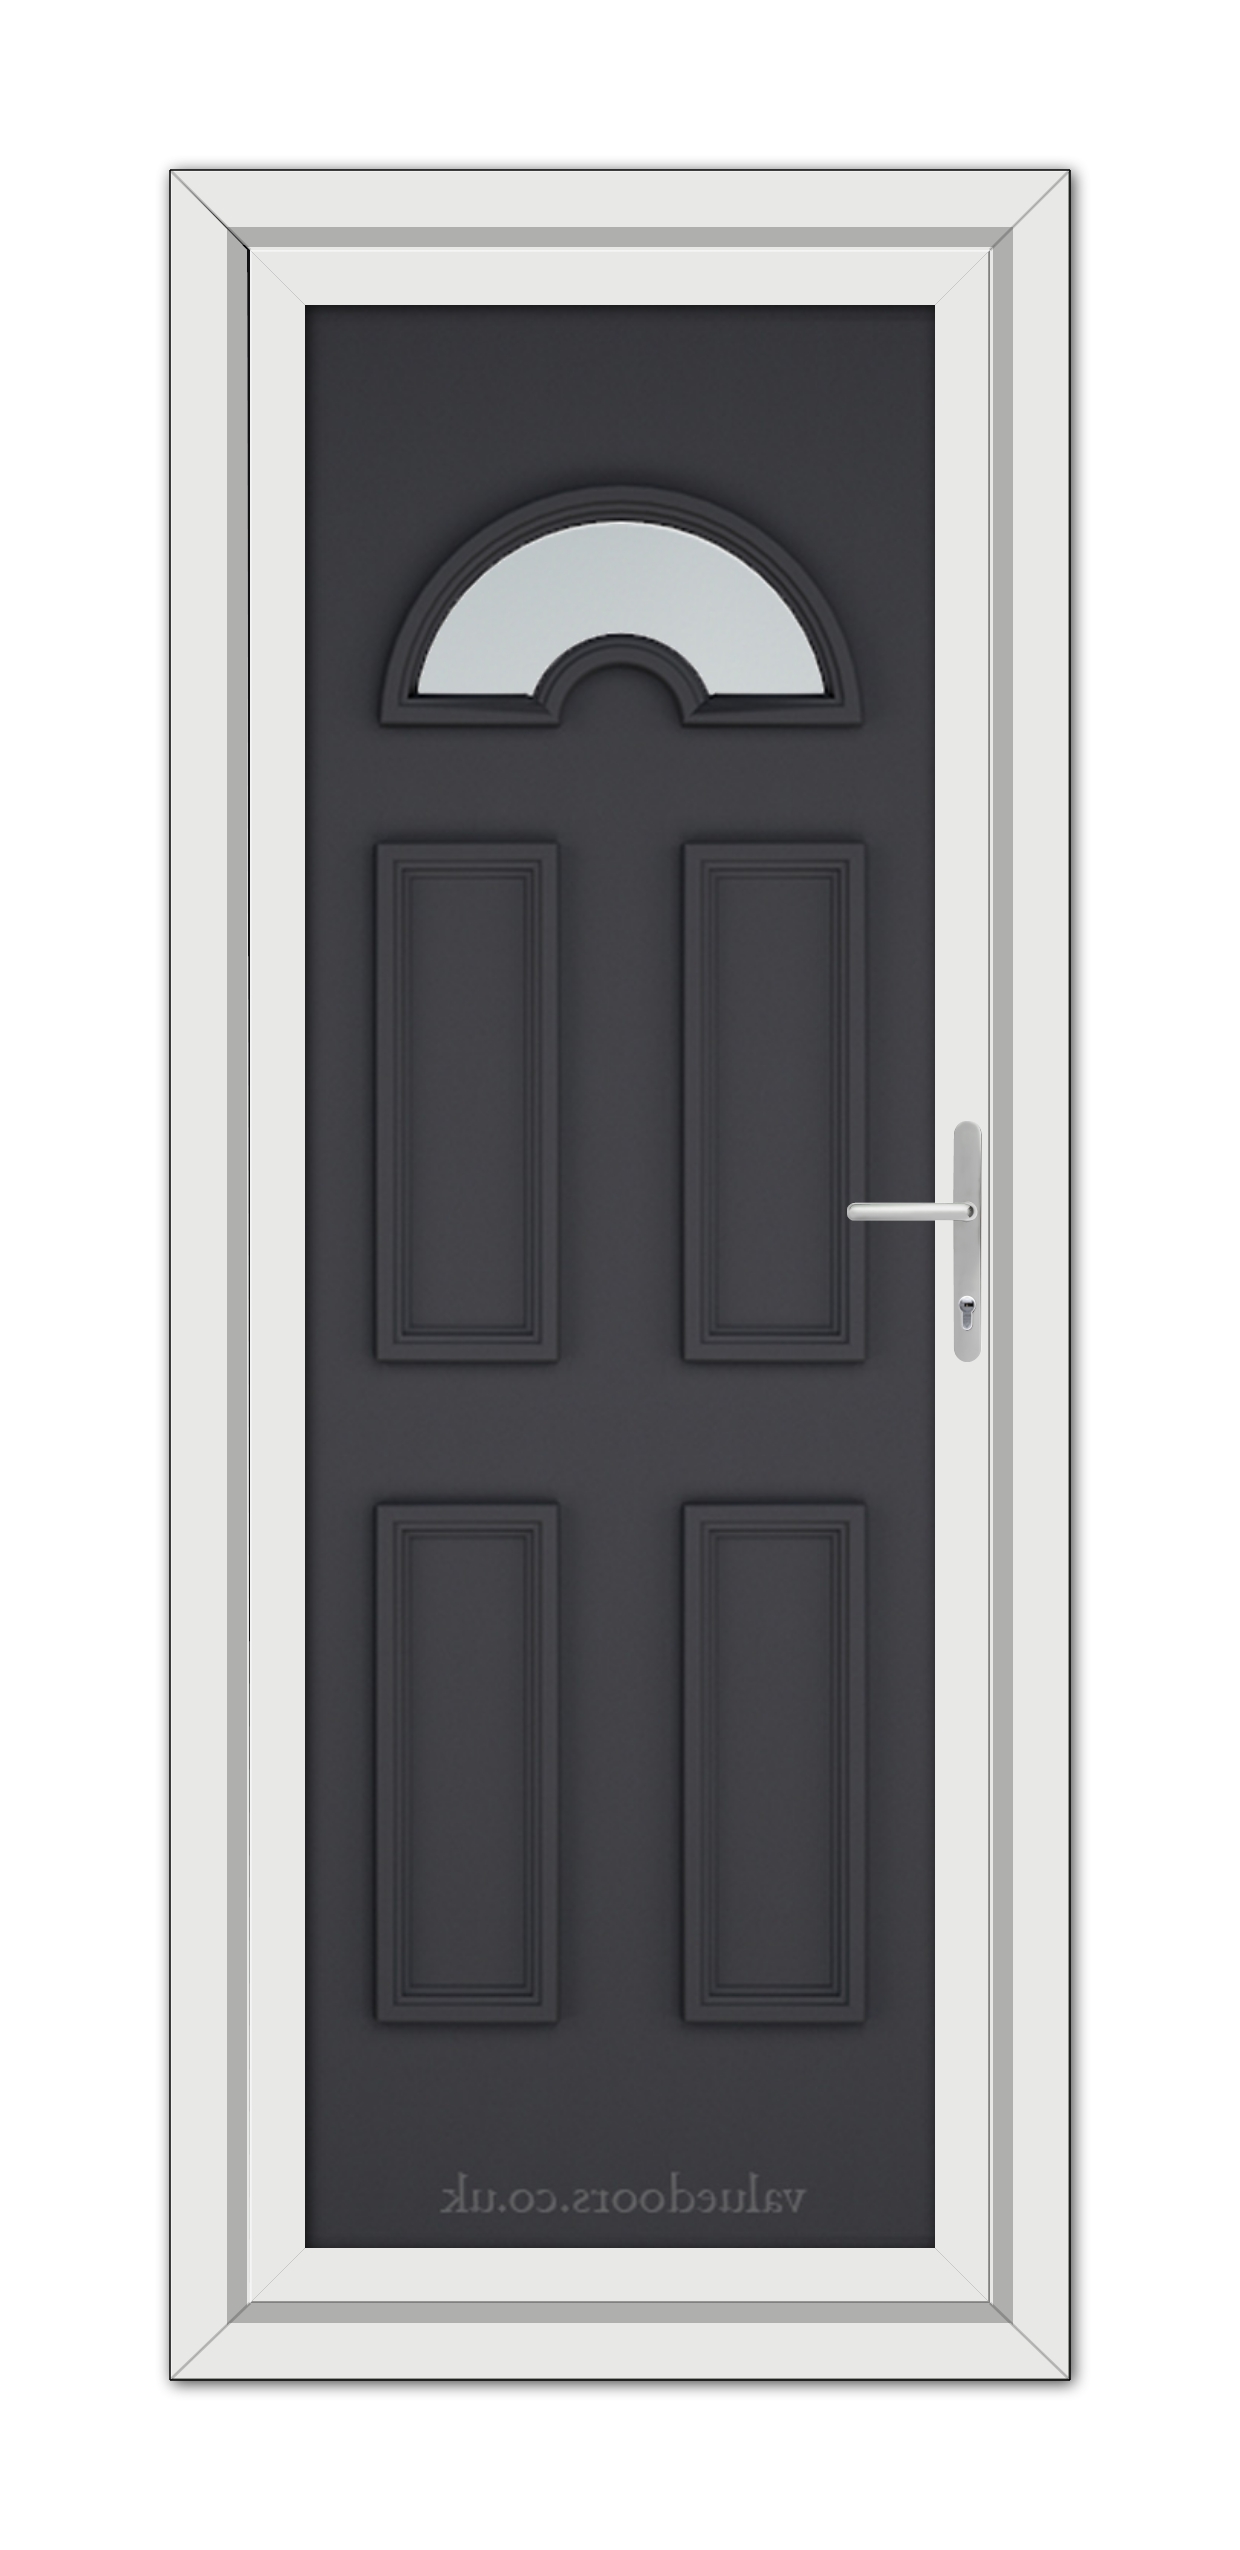 A modern Grey Sandringham uPVC Door featuring charcoal panels with a white frame and an arched top window, equipped with a metallic handle on the right side.